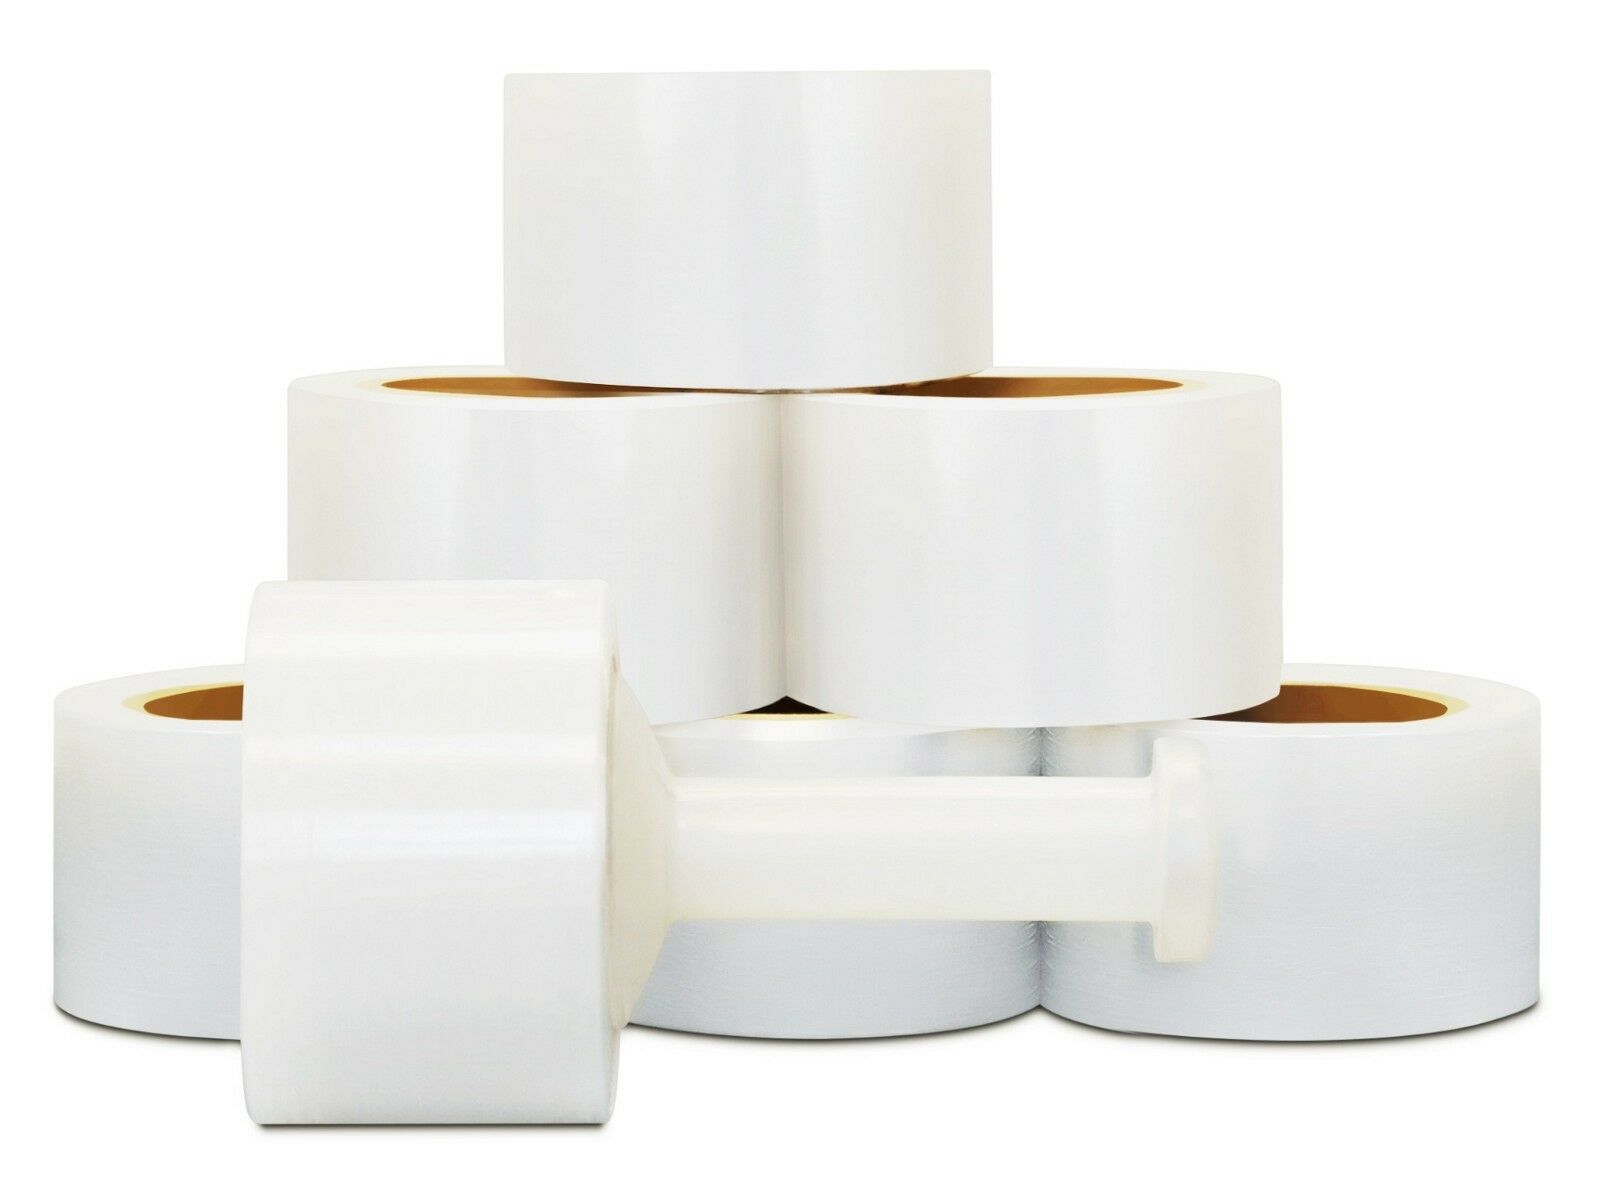 Hand Stretch Wrap / Plastic Film Choose Your Roll & Size (free Dispenser)